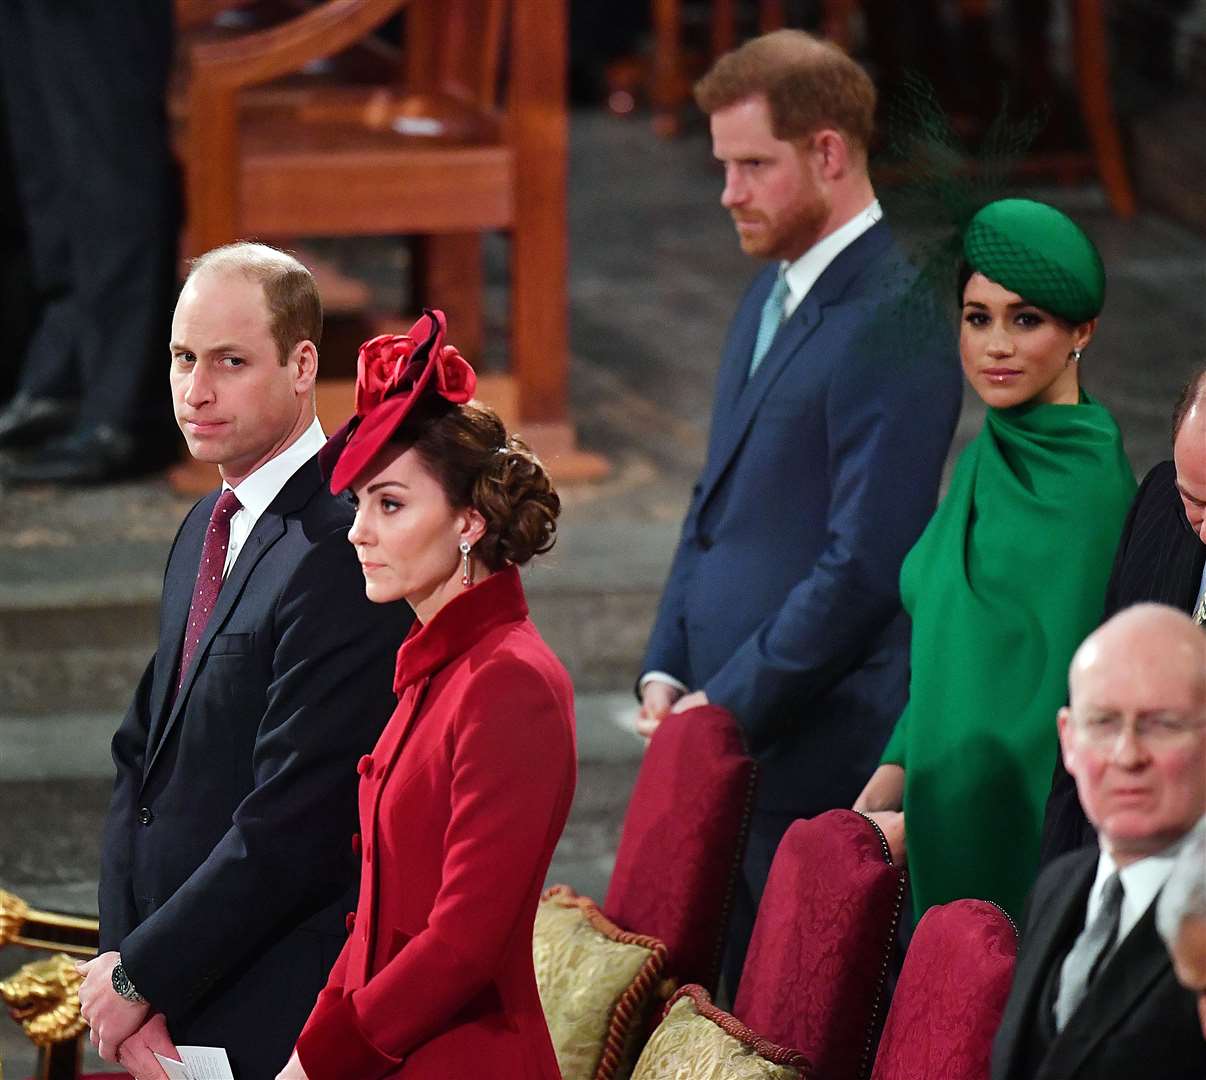 The Abbey hosted the Commonwealth Day service attended by the Cambridges and the Sussexes in March (Phil Harris/Daily Mirror/PA)